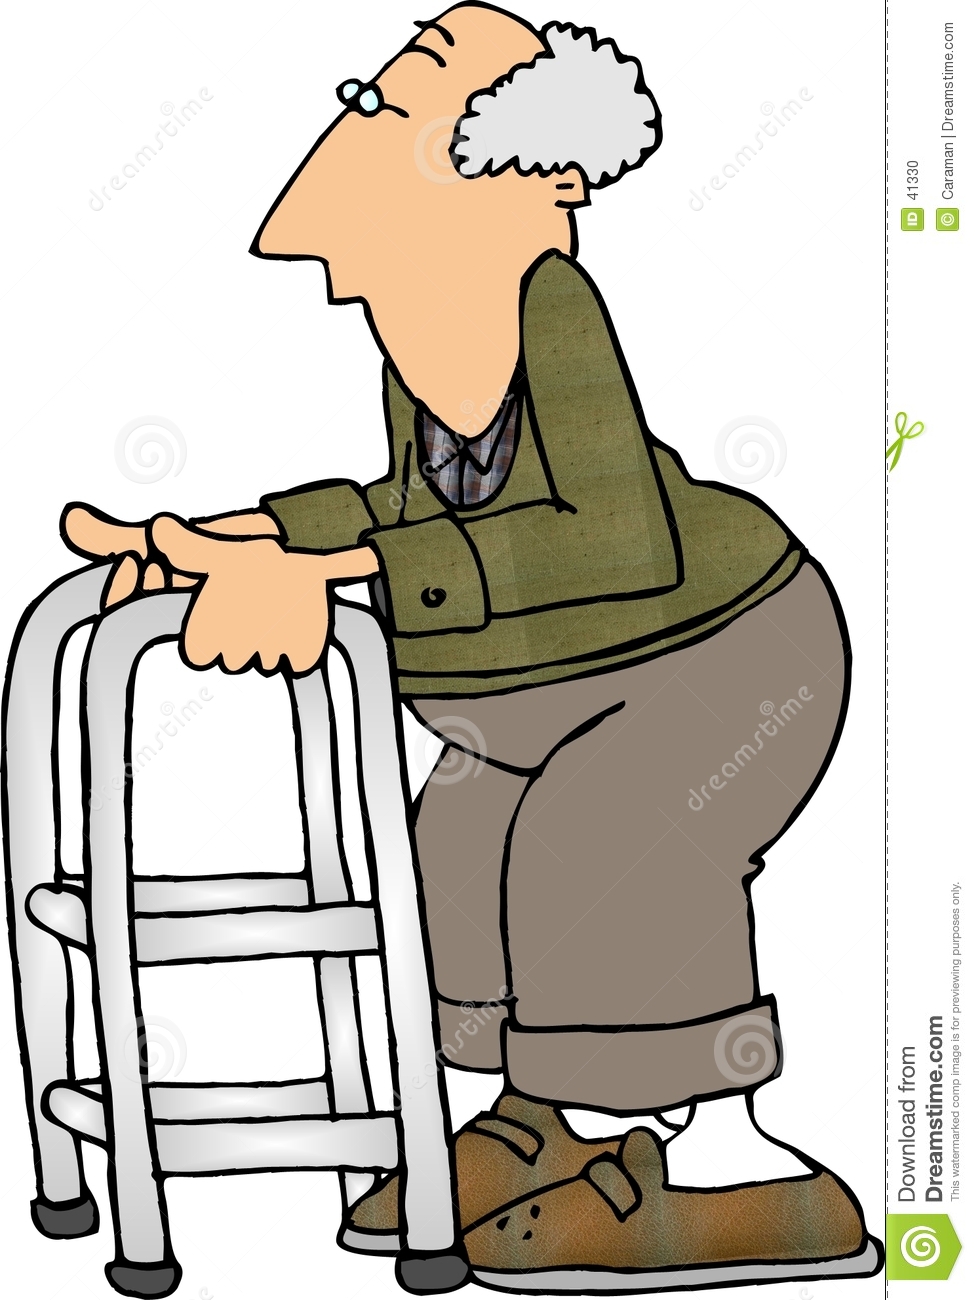 Old People Travel Clipart   Cliparthut   Free Clipart